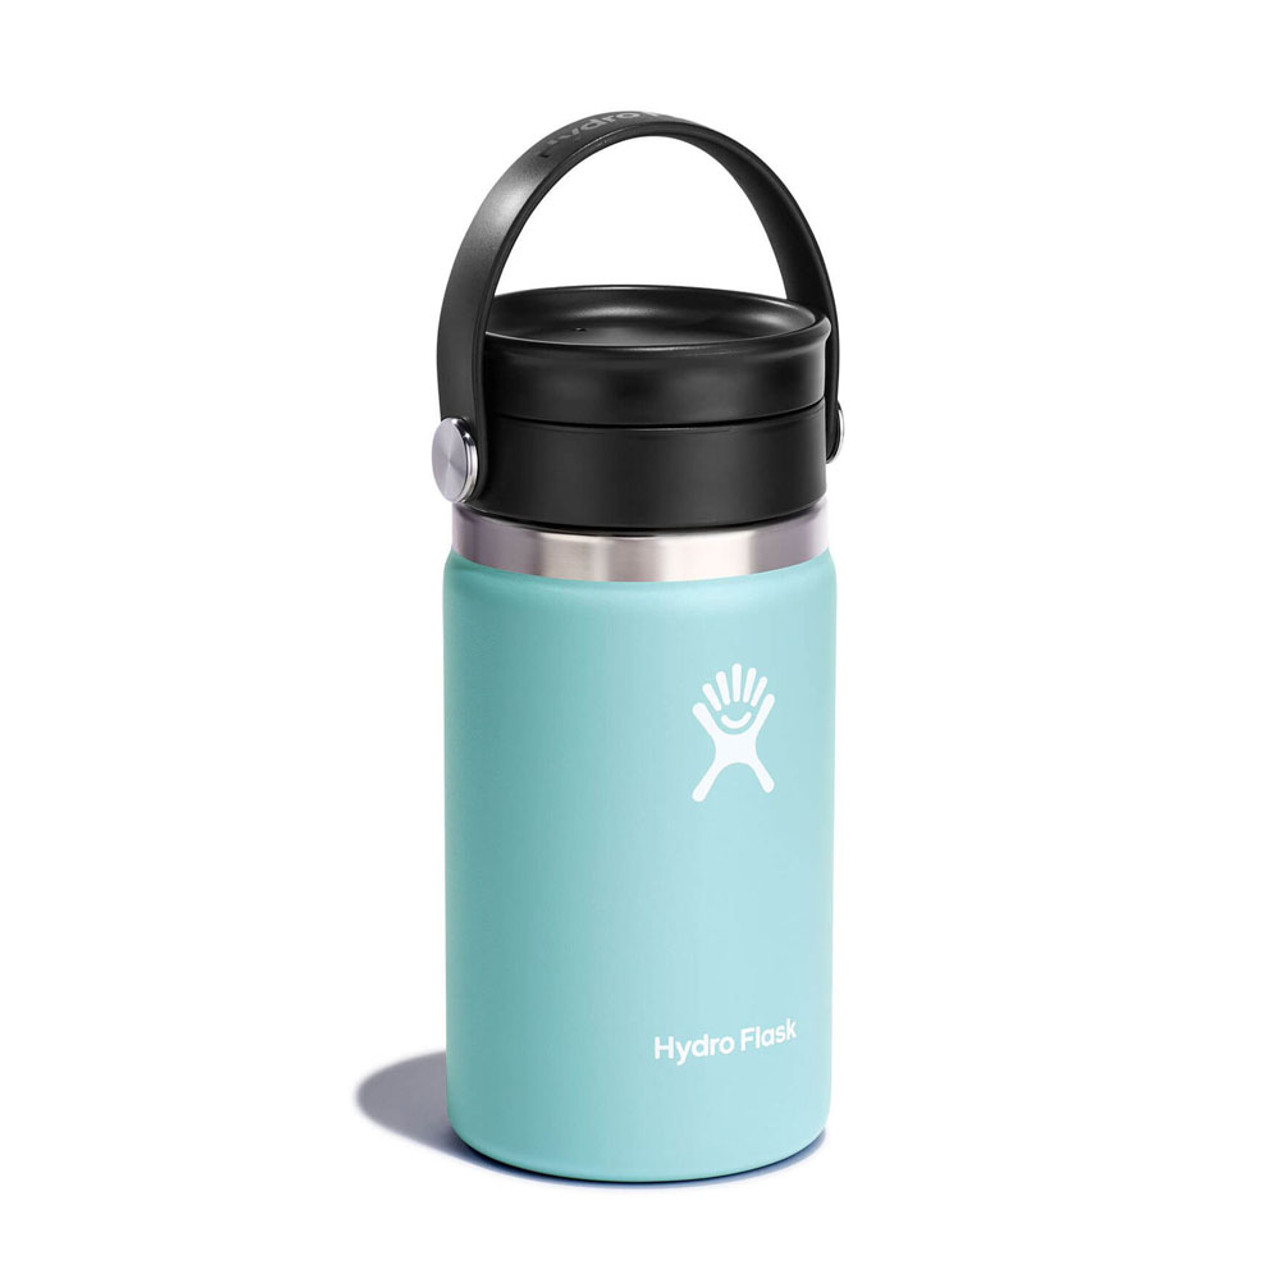 Hydro Flask Wide Mouth Coffee with Flex Sip Lid 16oz Pacific